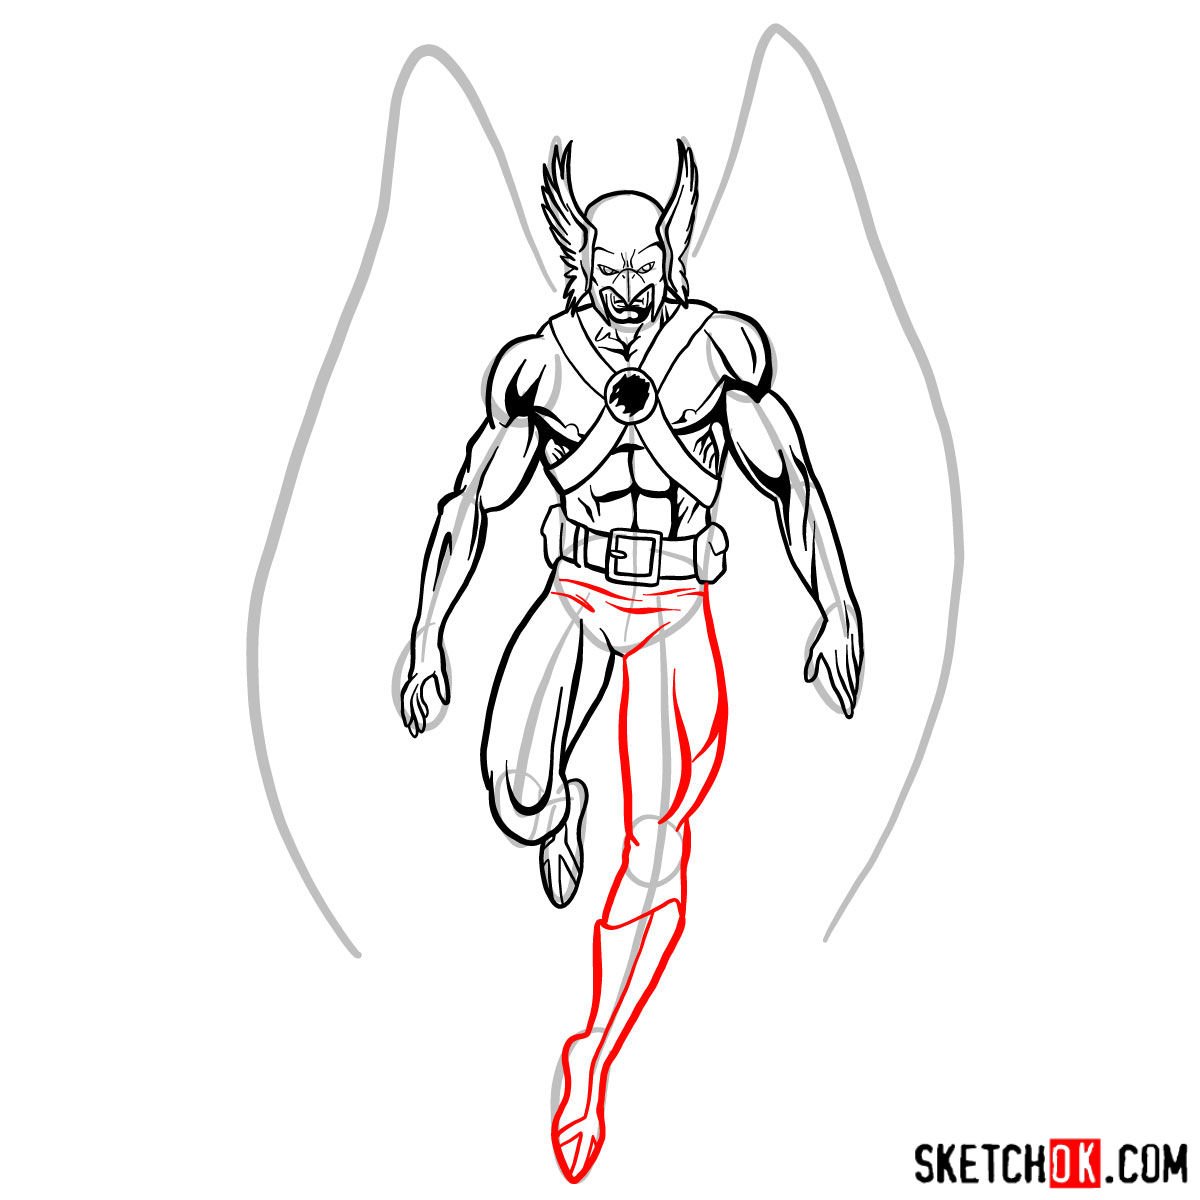 How to draw Hawkman from DC Comics - Sketchok easy drawing guides